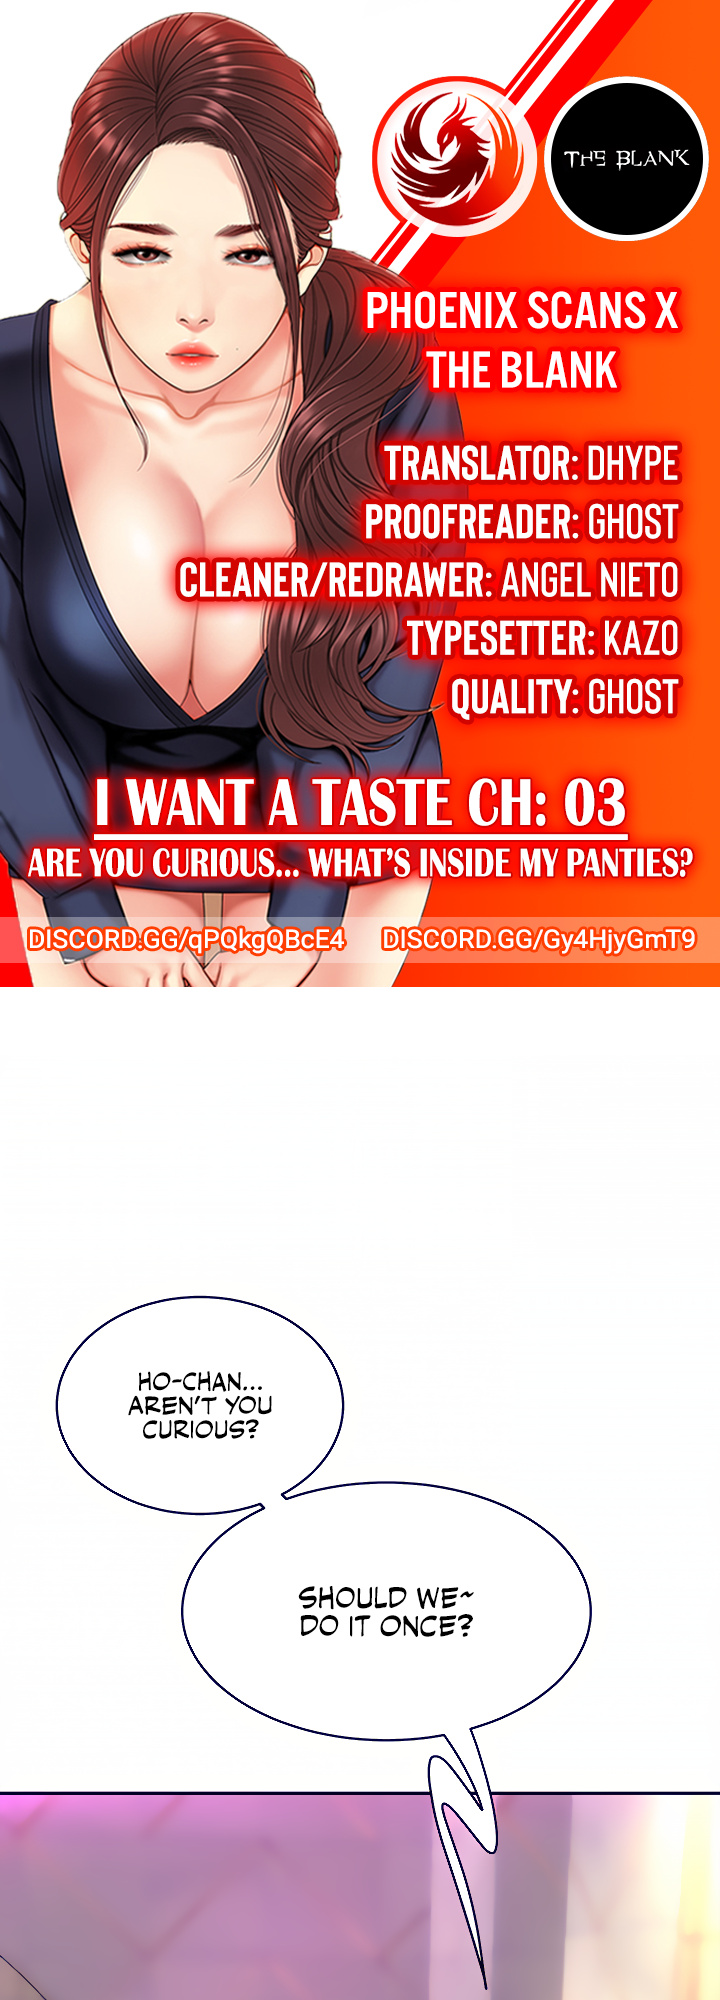 I Want A Taste - Page 1